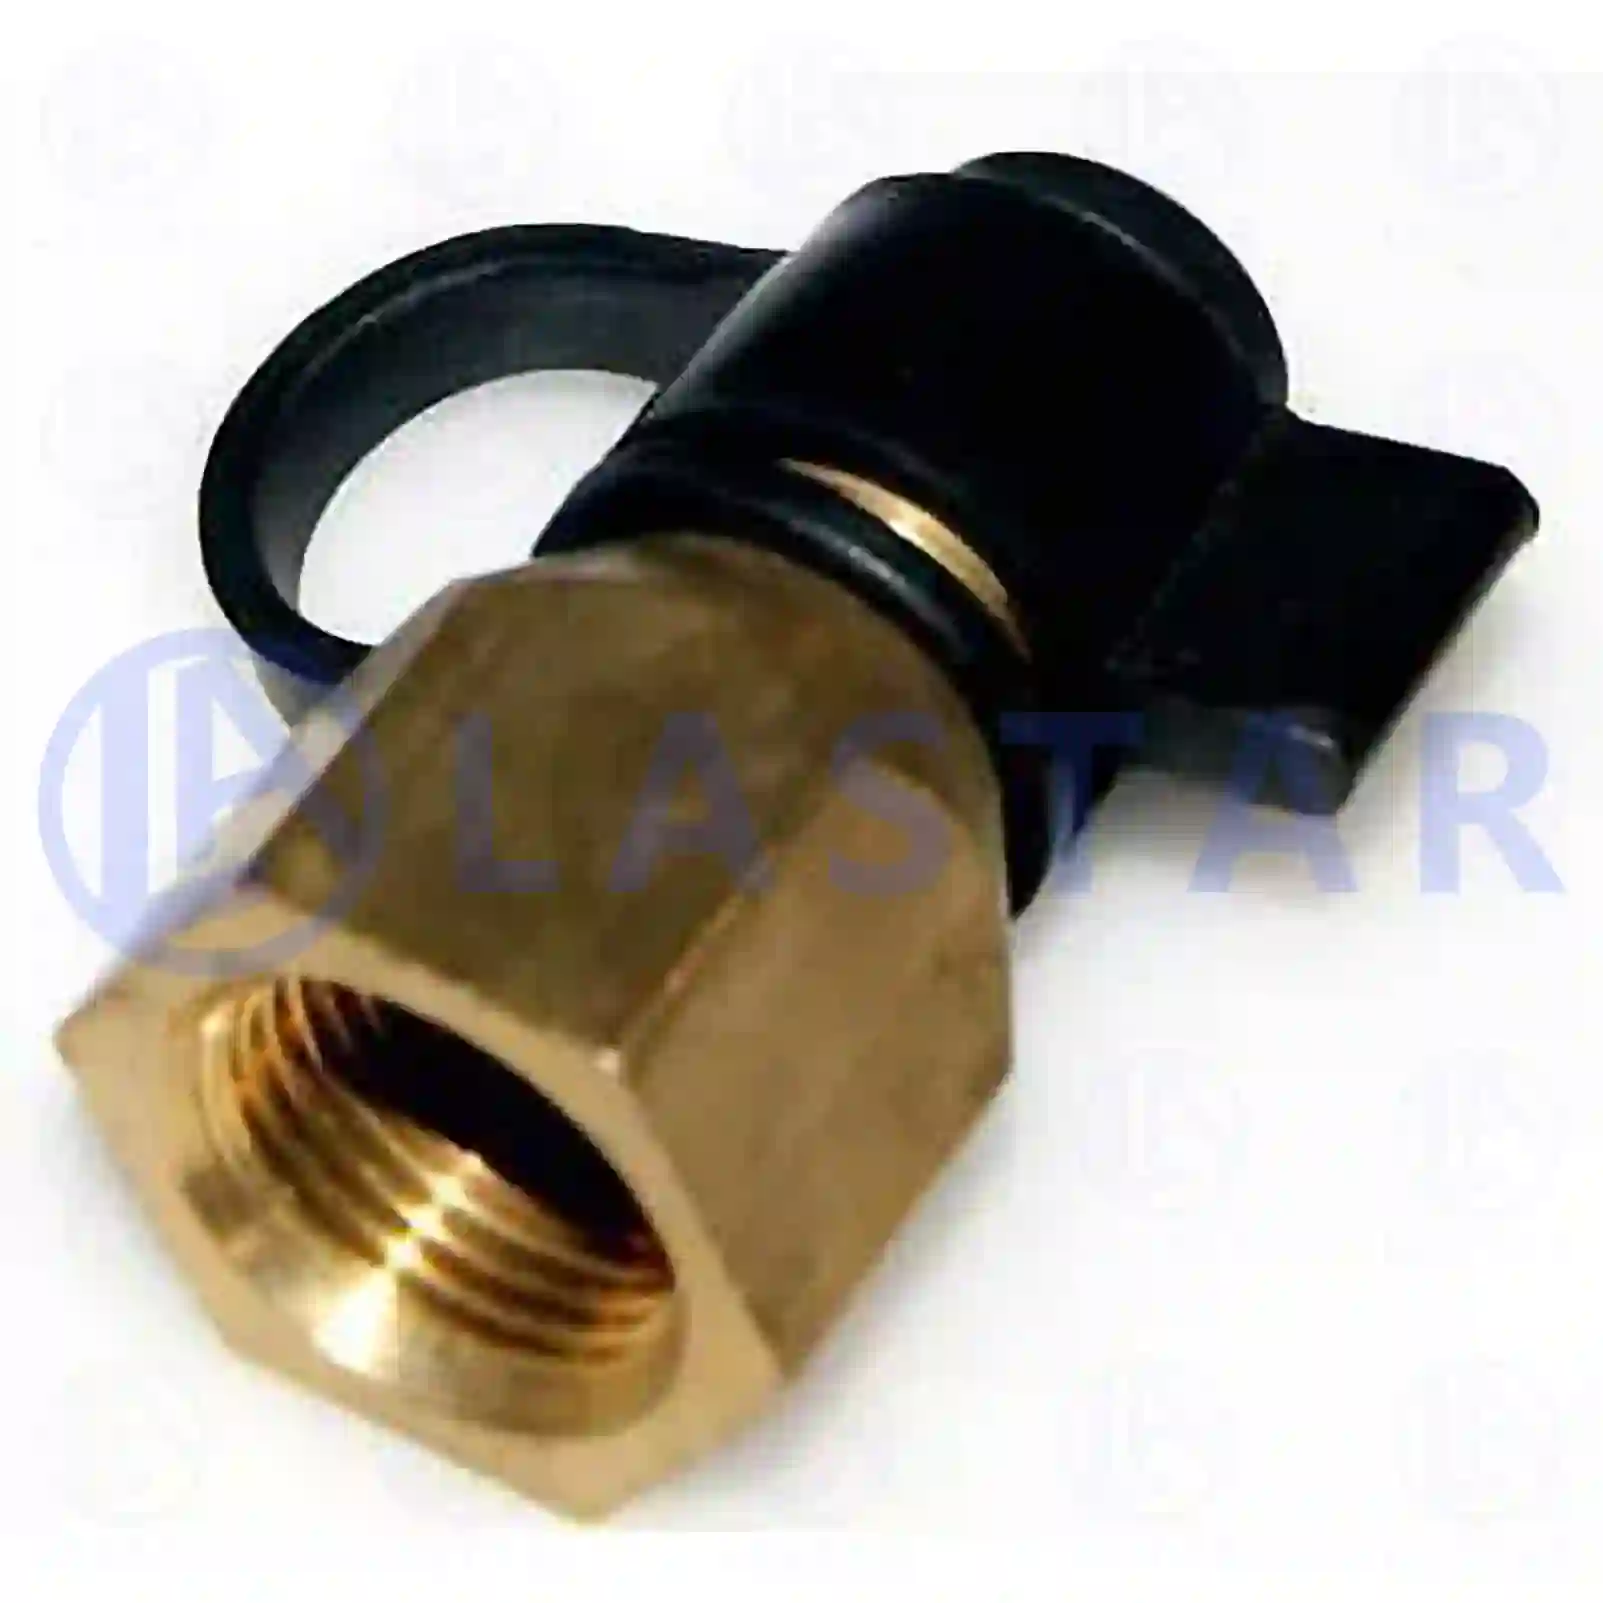 Test connector, 77724850, 06912000102, 81981256037, 81981256043, 81981256048 ||  77724850 Lastar Spare Part | Truck Spare Parts, Auotomotive Spare Parts Test connector, 77724850, 06912000102, 81981256037, 81981256043, 81981256048 ||  77724850 Lastar Spare Part | Truck Spare Parts, Auotomotive Spare Parts